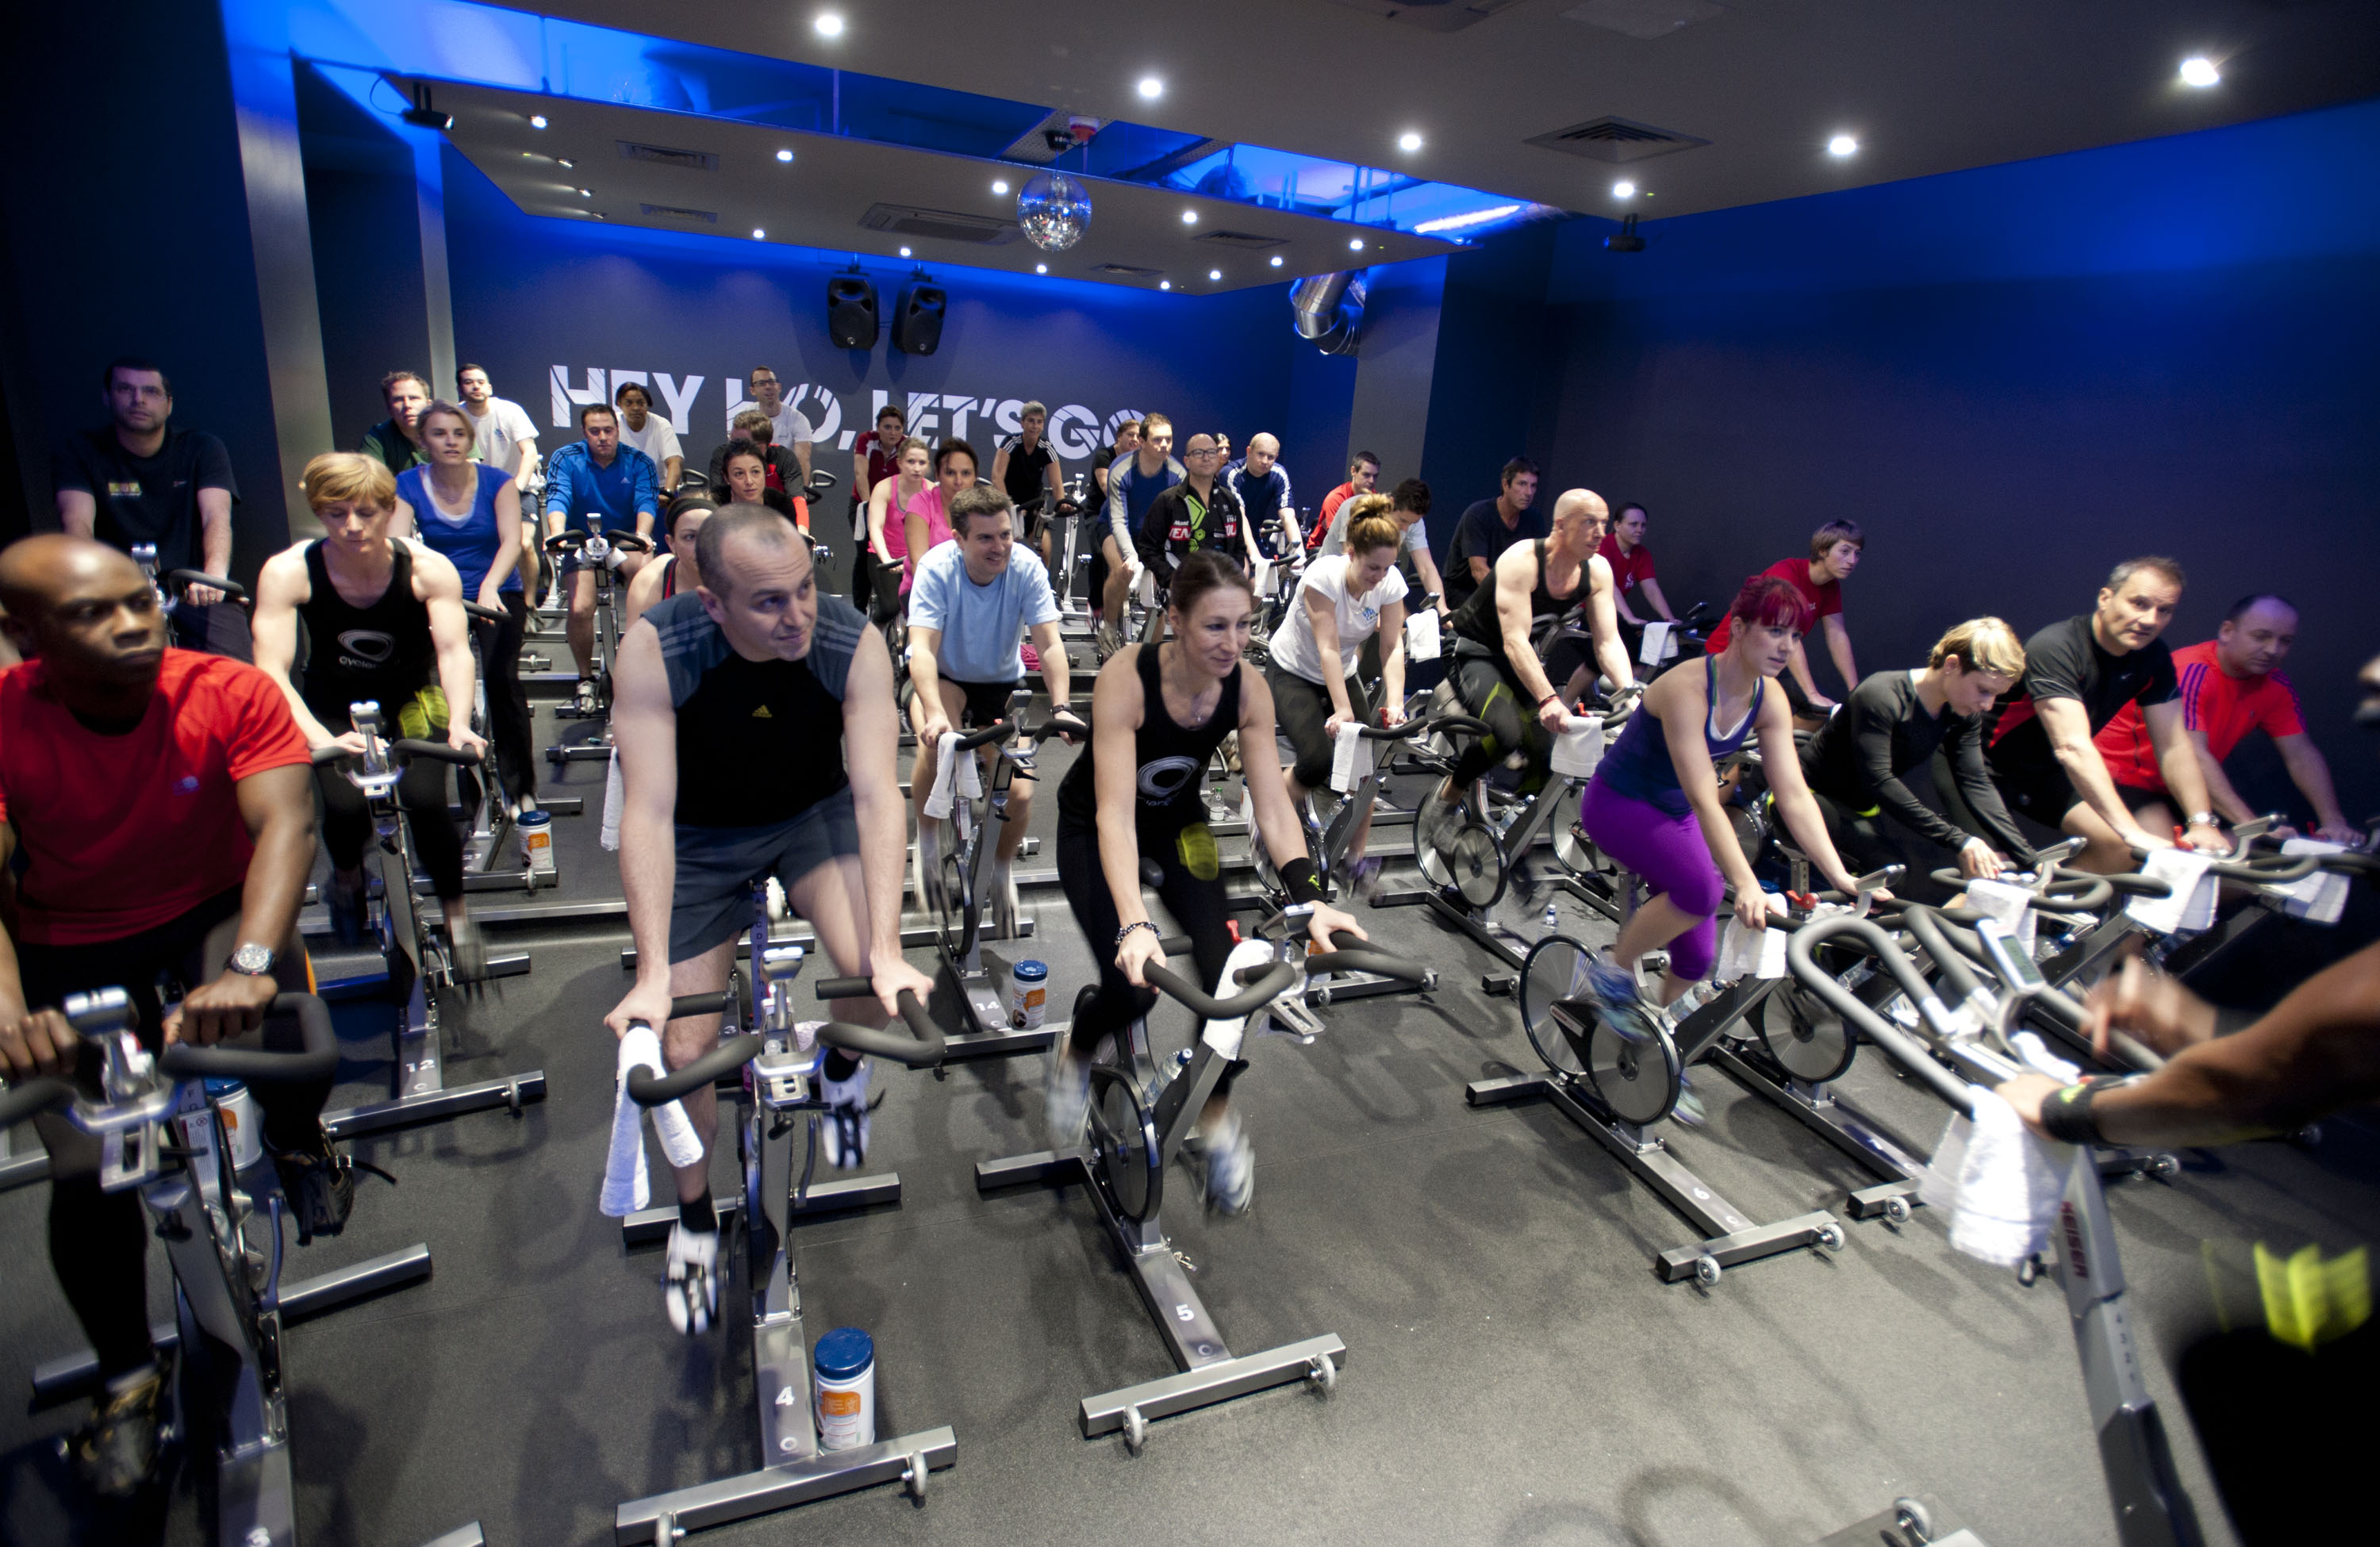 Review Cyclebeat Boutique Cycling Studio Lunges And Lycra intended for Cycling Studio